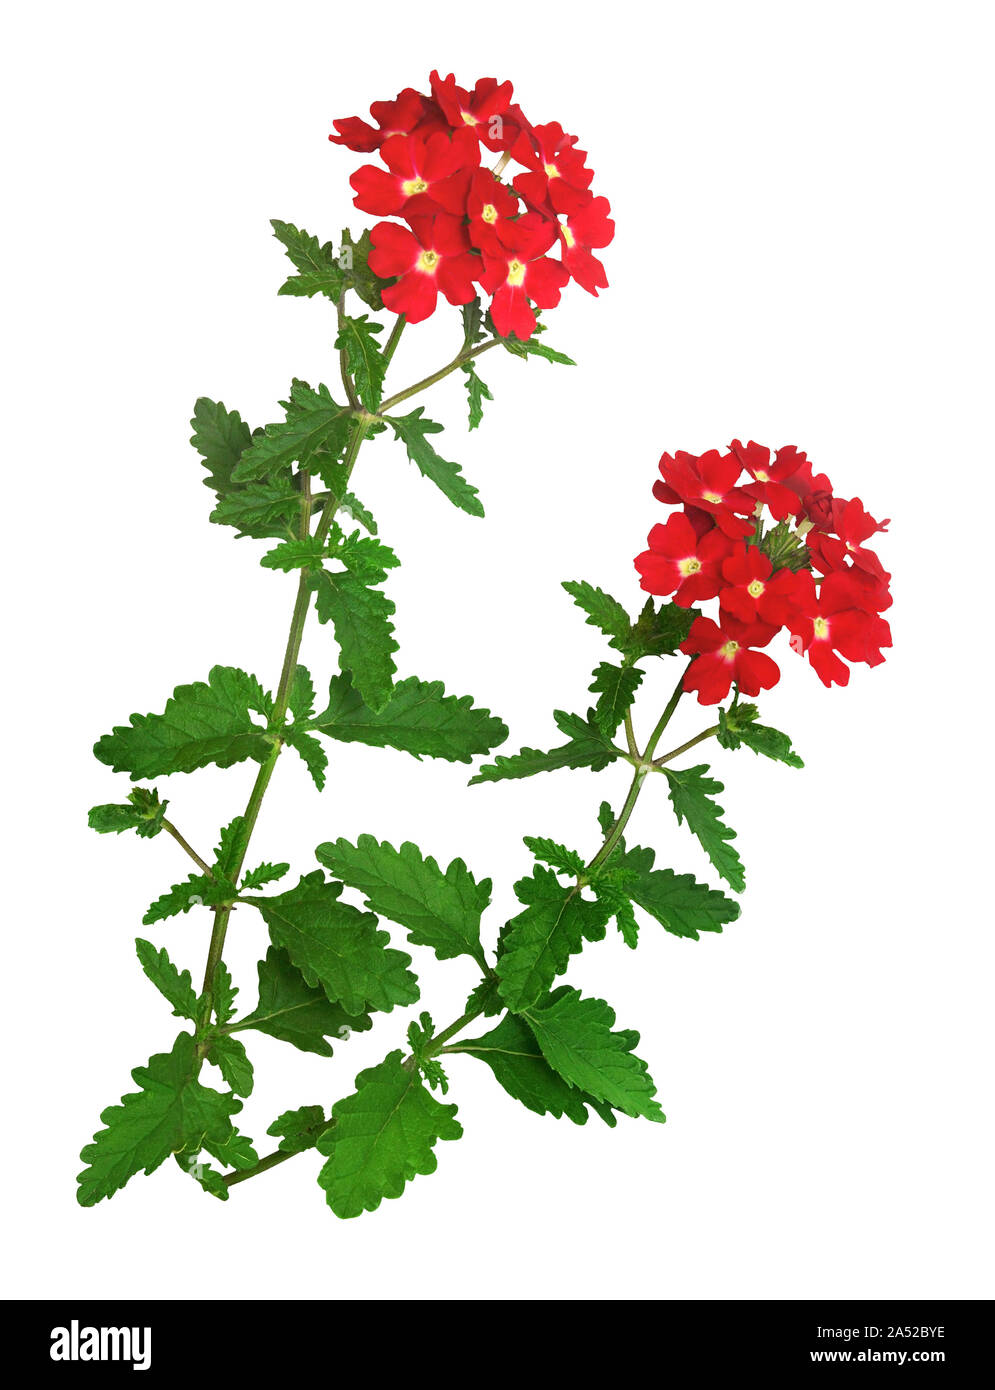 Red flowers of a garden verbena plant, isolated on white background. Stock Photo